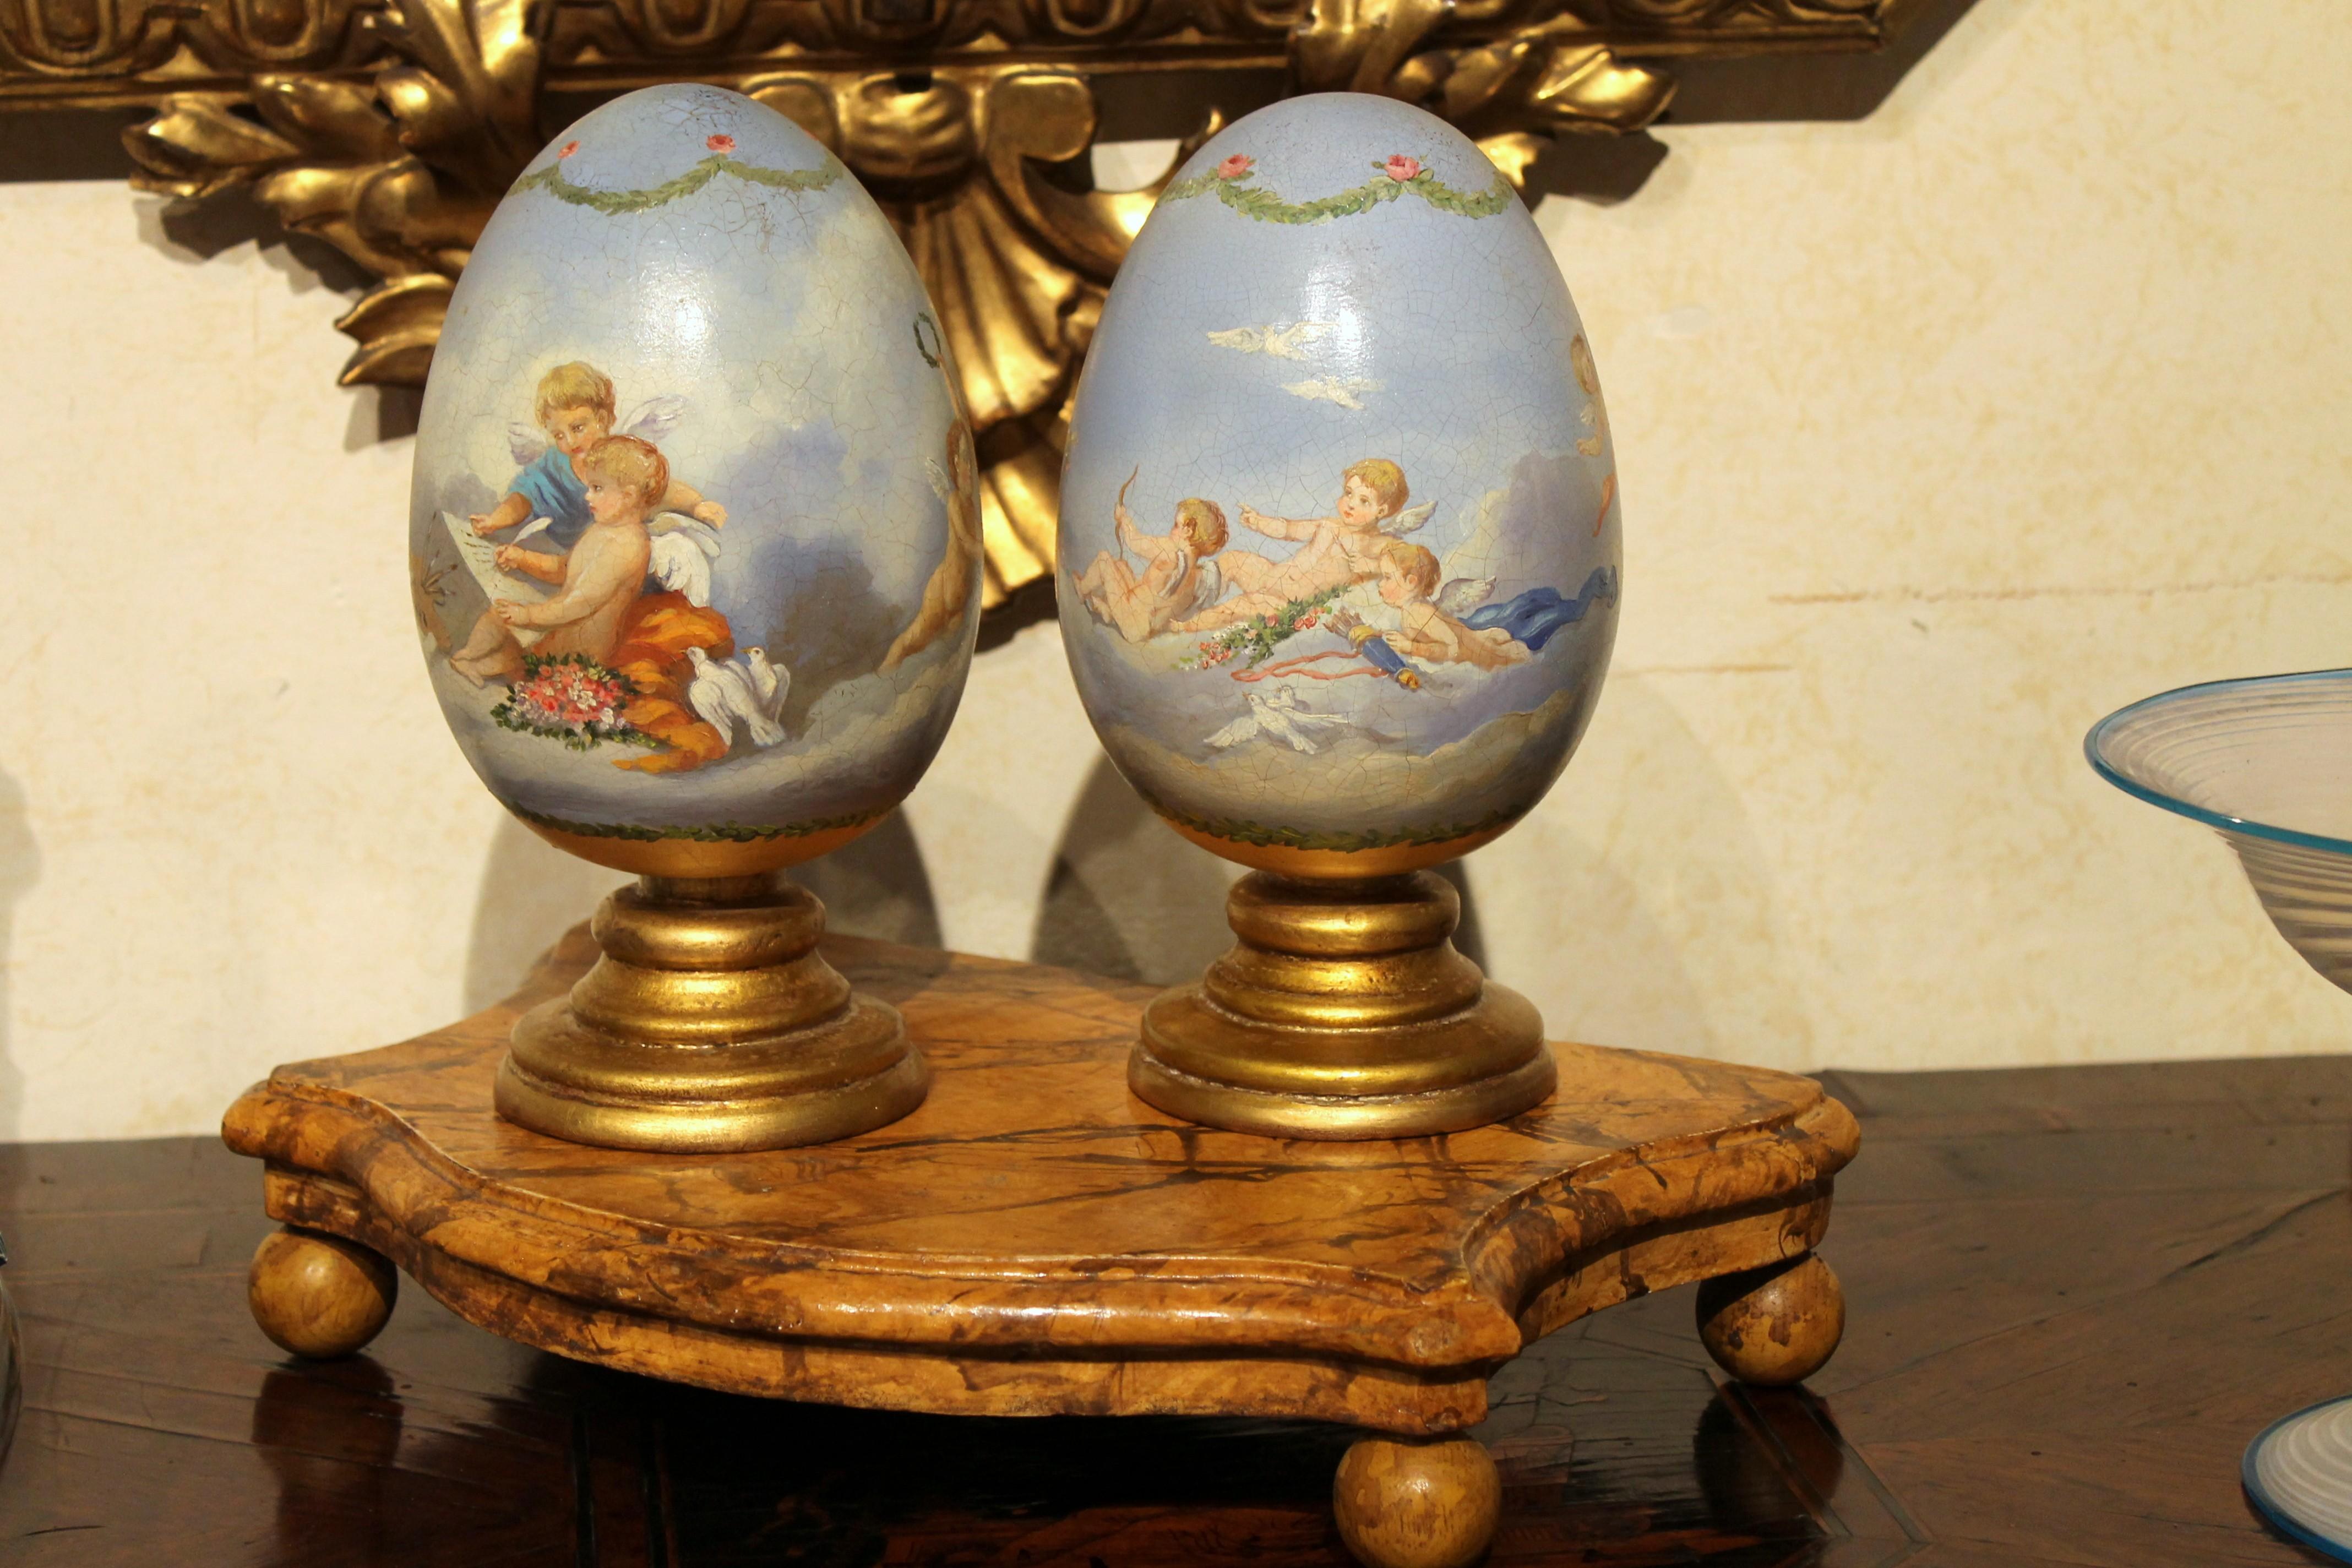 This pair of Italian romantic terracotta eggs painted in the round on giltwood stands are a lovely decorative object, hand painted with extreme attention to details features putti and cherubs lying on white fluffy clouds in a blue sky. 
A putto is